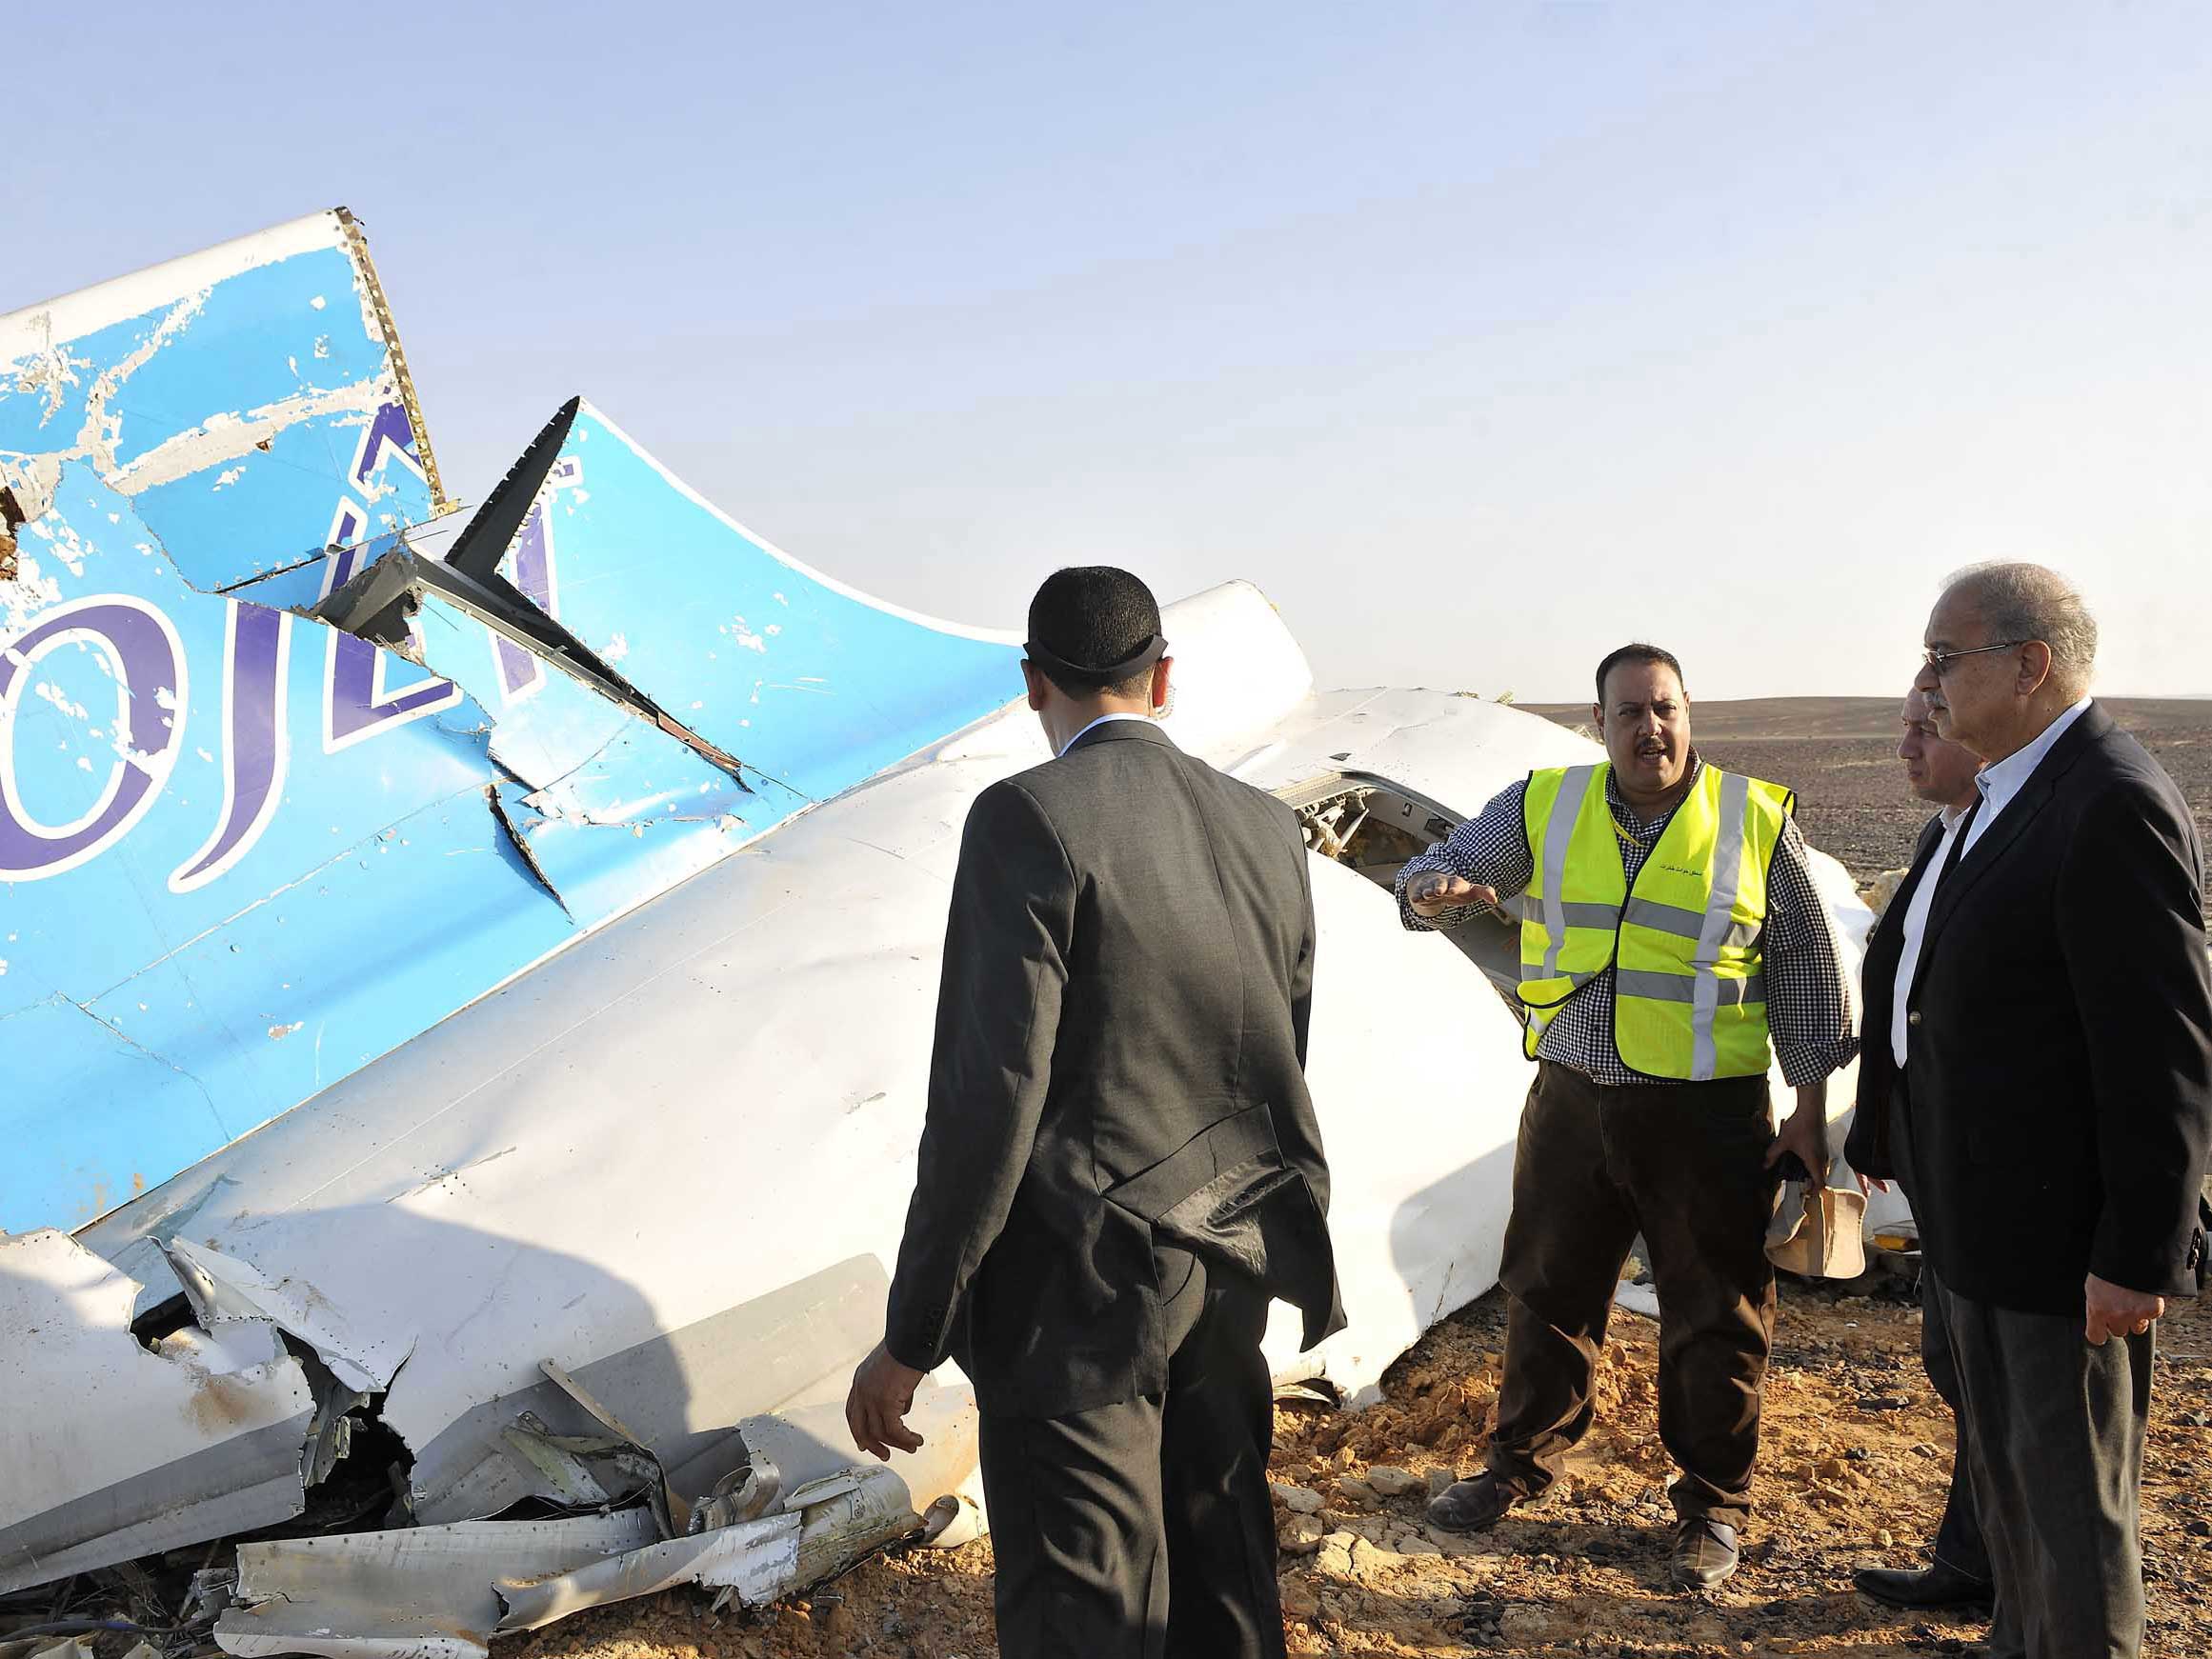 Isis claimed it was behind the plane crash that killed all 224 people on board